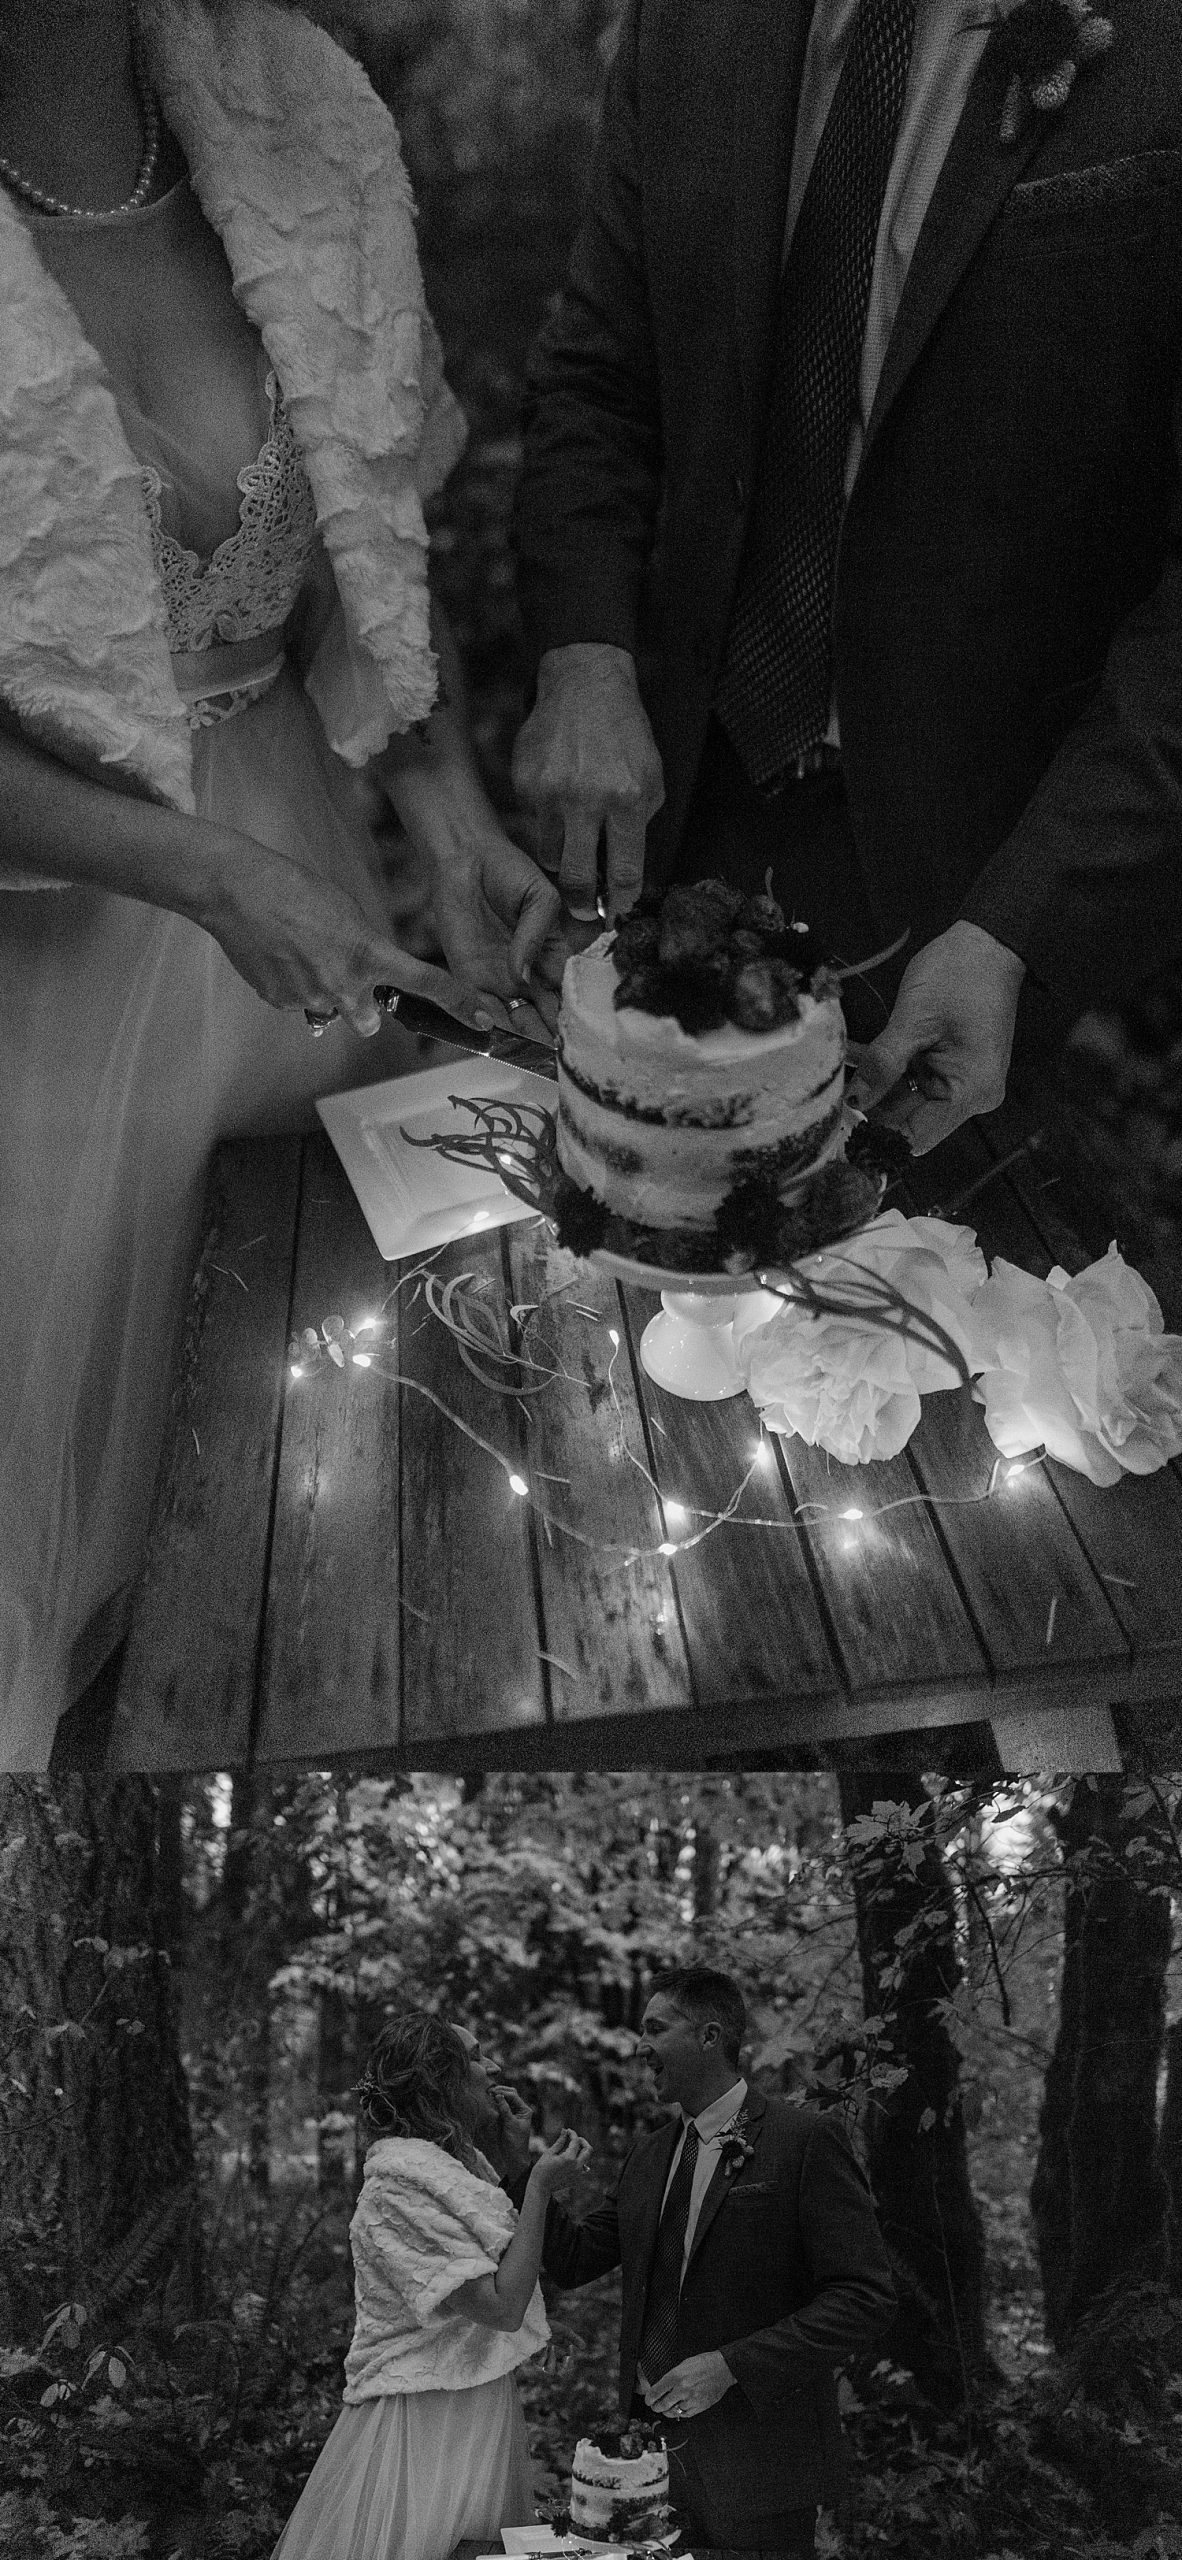 Black and white photos of a married couple eating cake